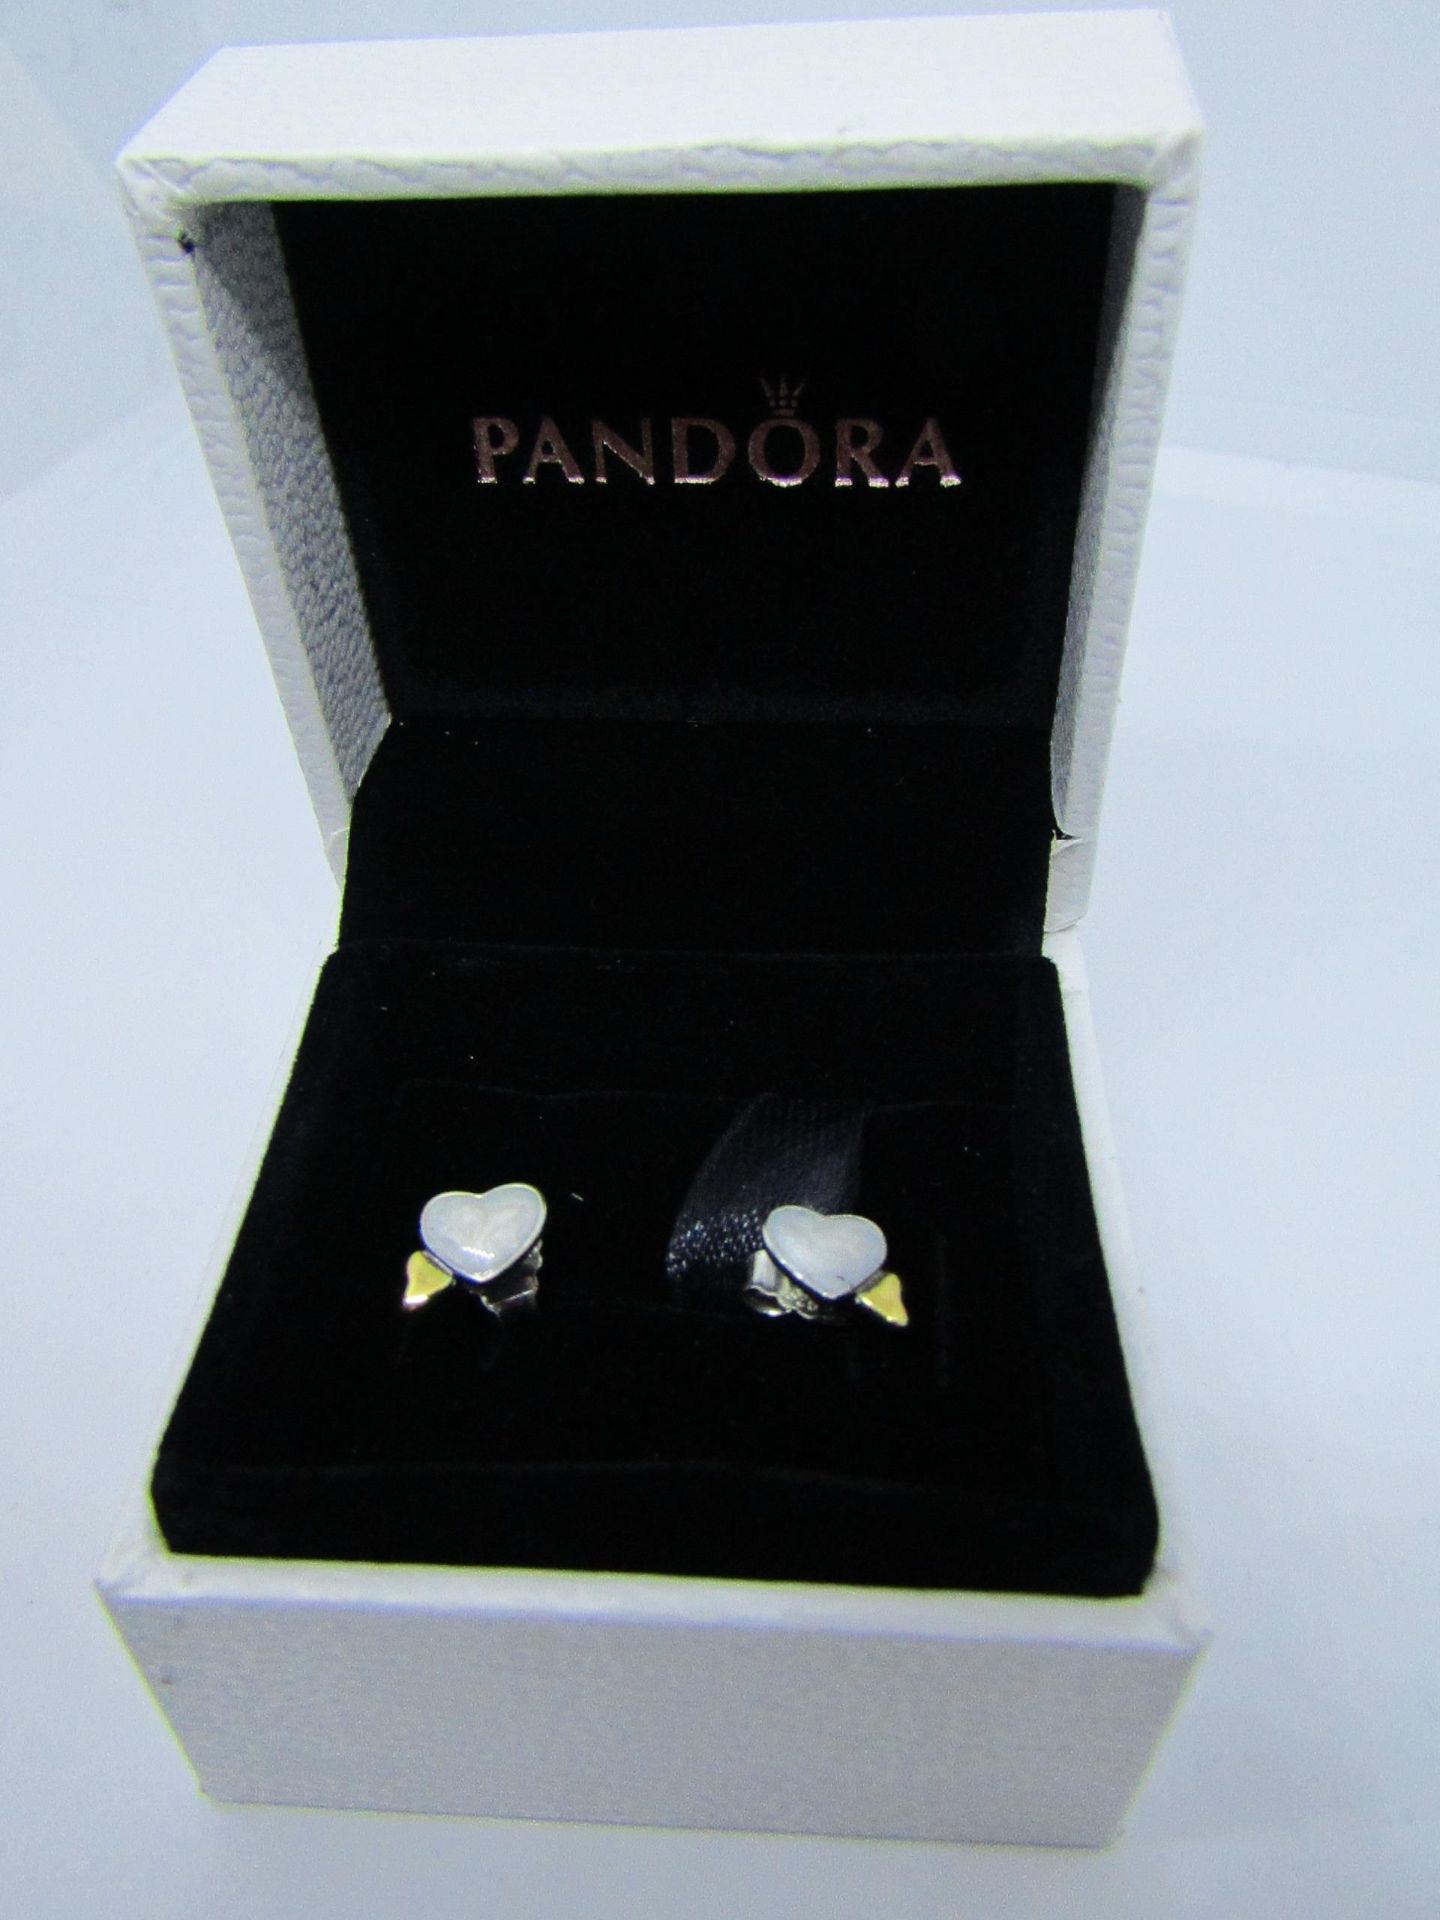 Pandora Silver 925 Earrings (see image for design) in Presentation box & Gift bag (ideal gift for